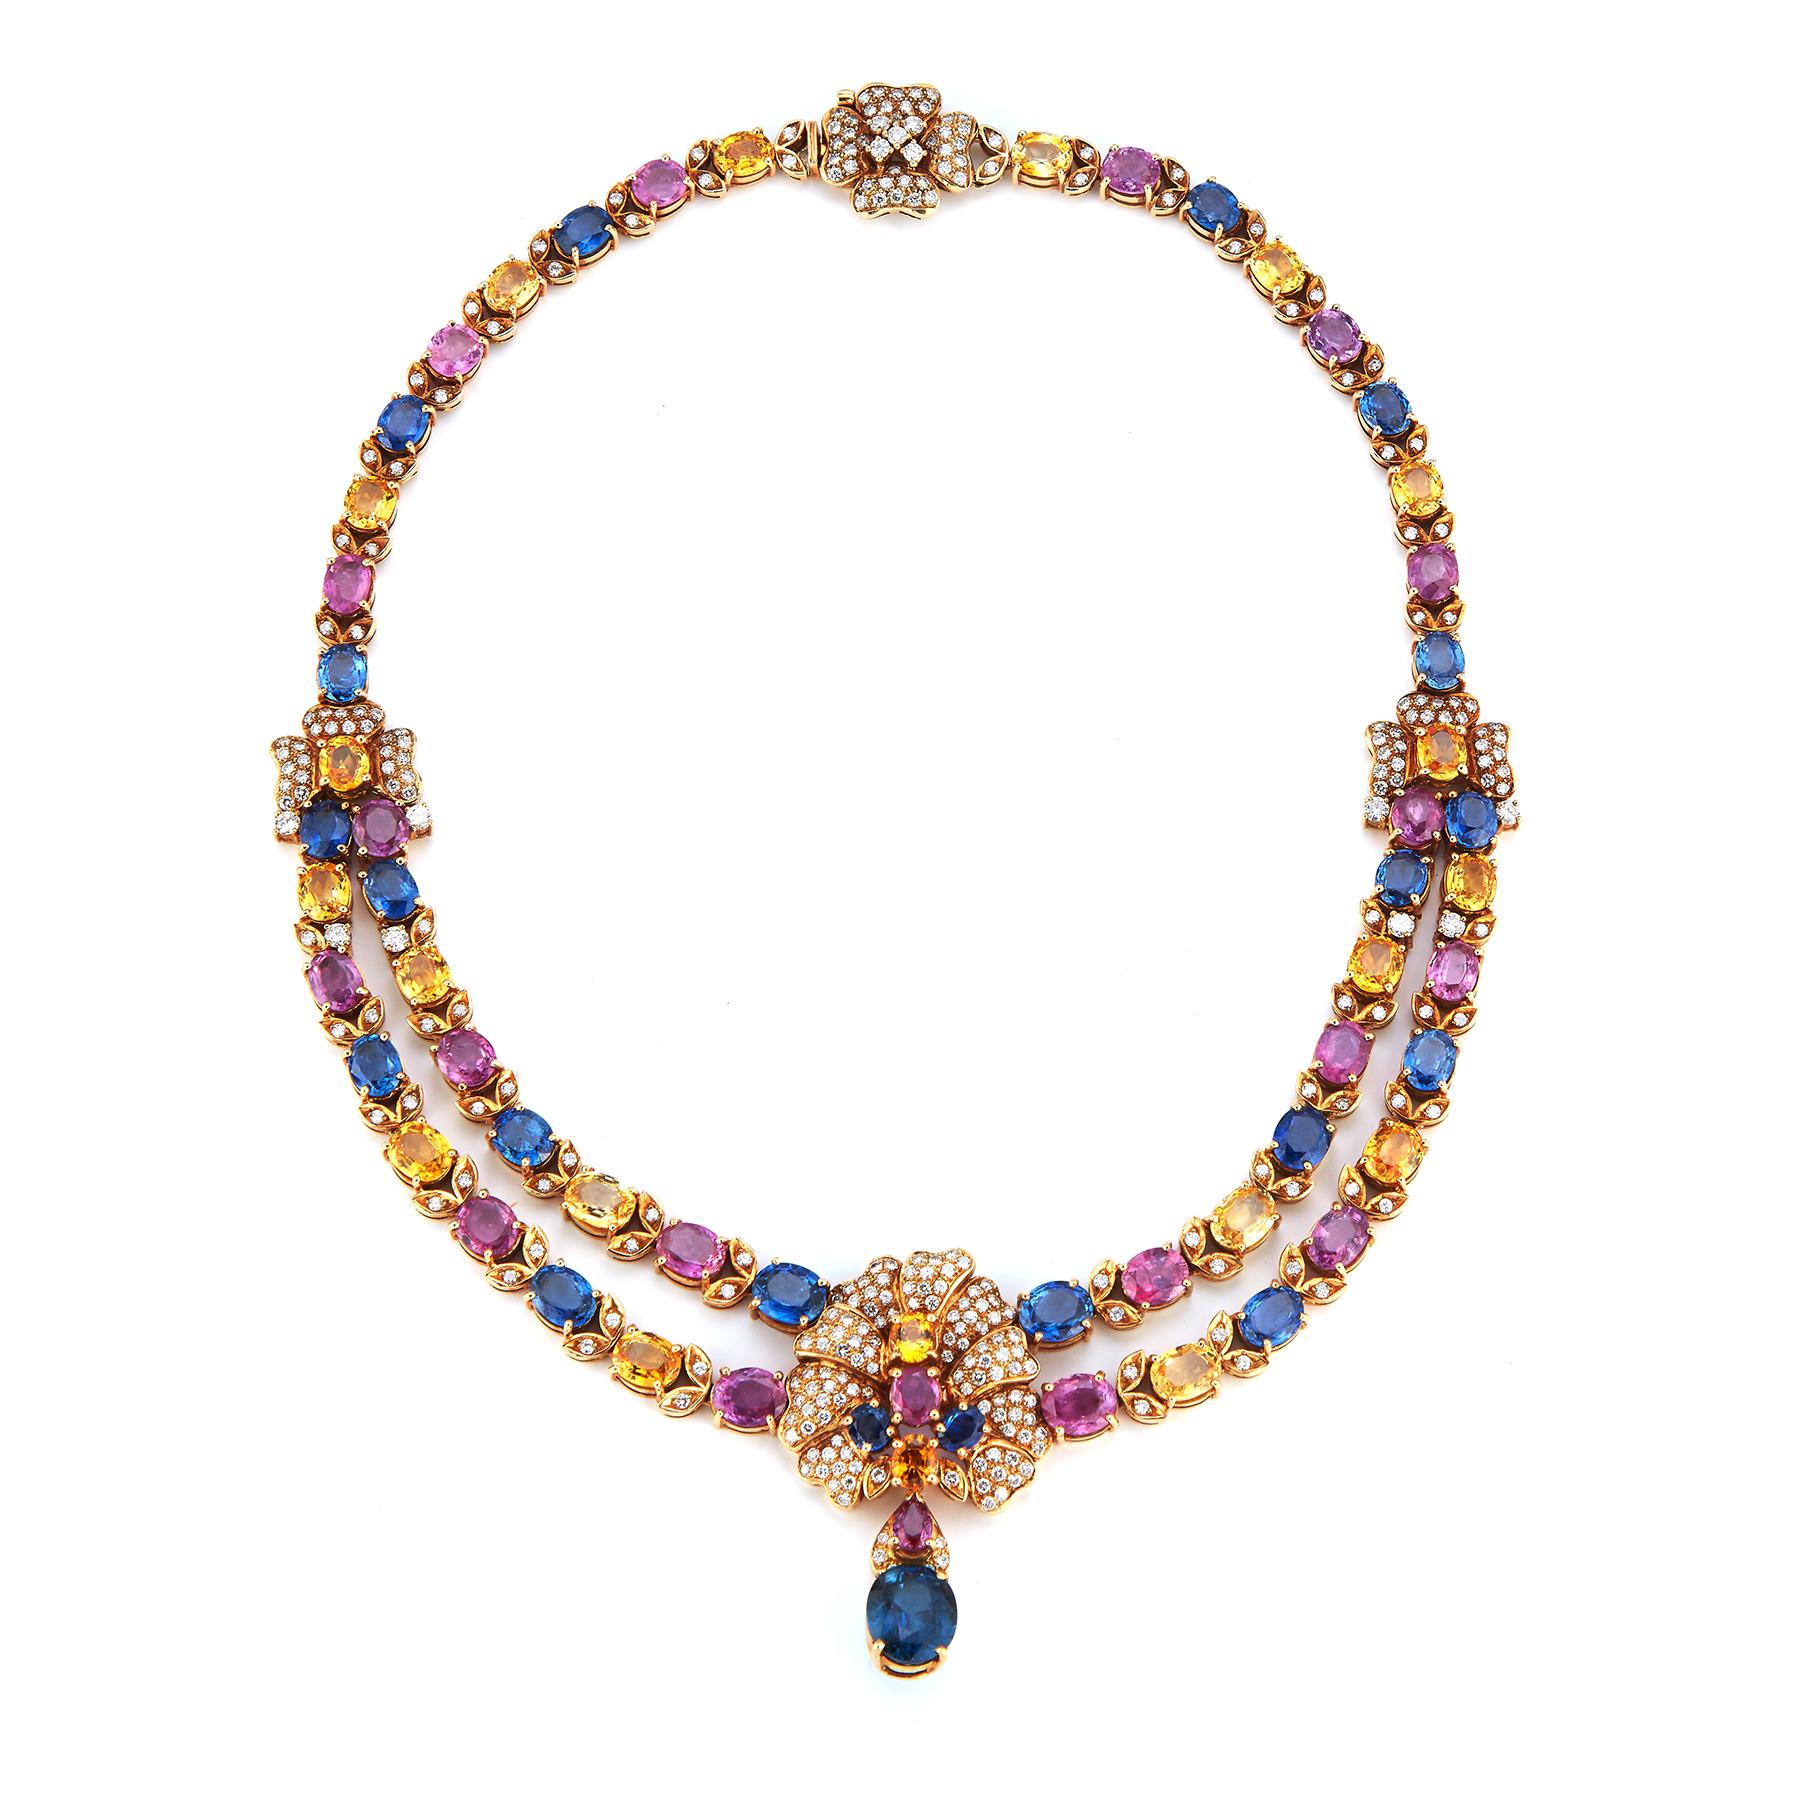 Magnificent Multi Color Sapphire & Gold Necklace 
18K Yellow gold foliate design neck with 310 Brilliant cut diamonds approximately 6.37 ct and 20 pink sapphires approximately 29.7 ct and 20 oval blue sapphires approximately 25.65 ct and 30 oval